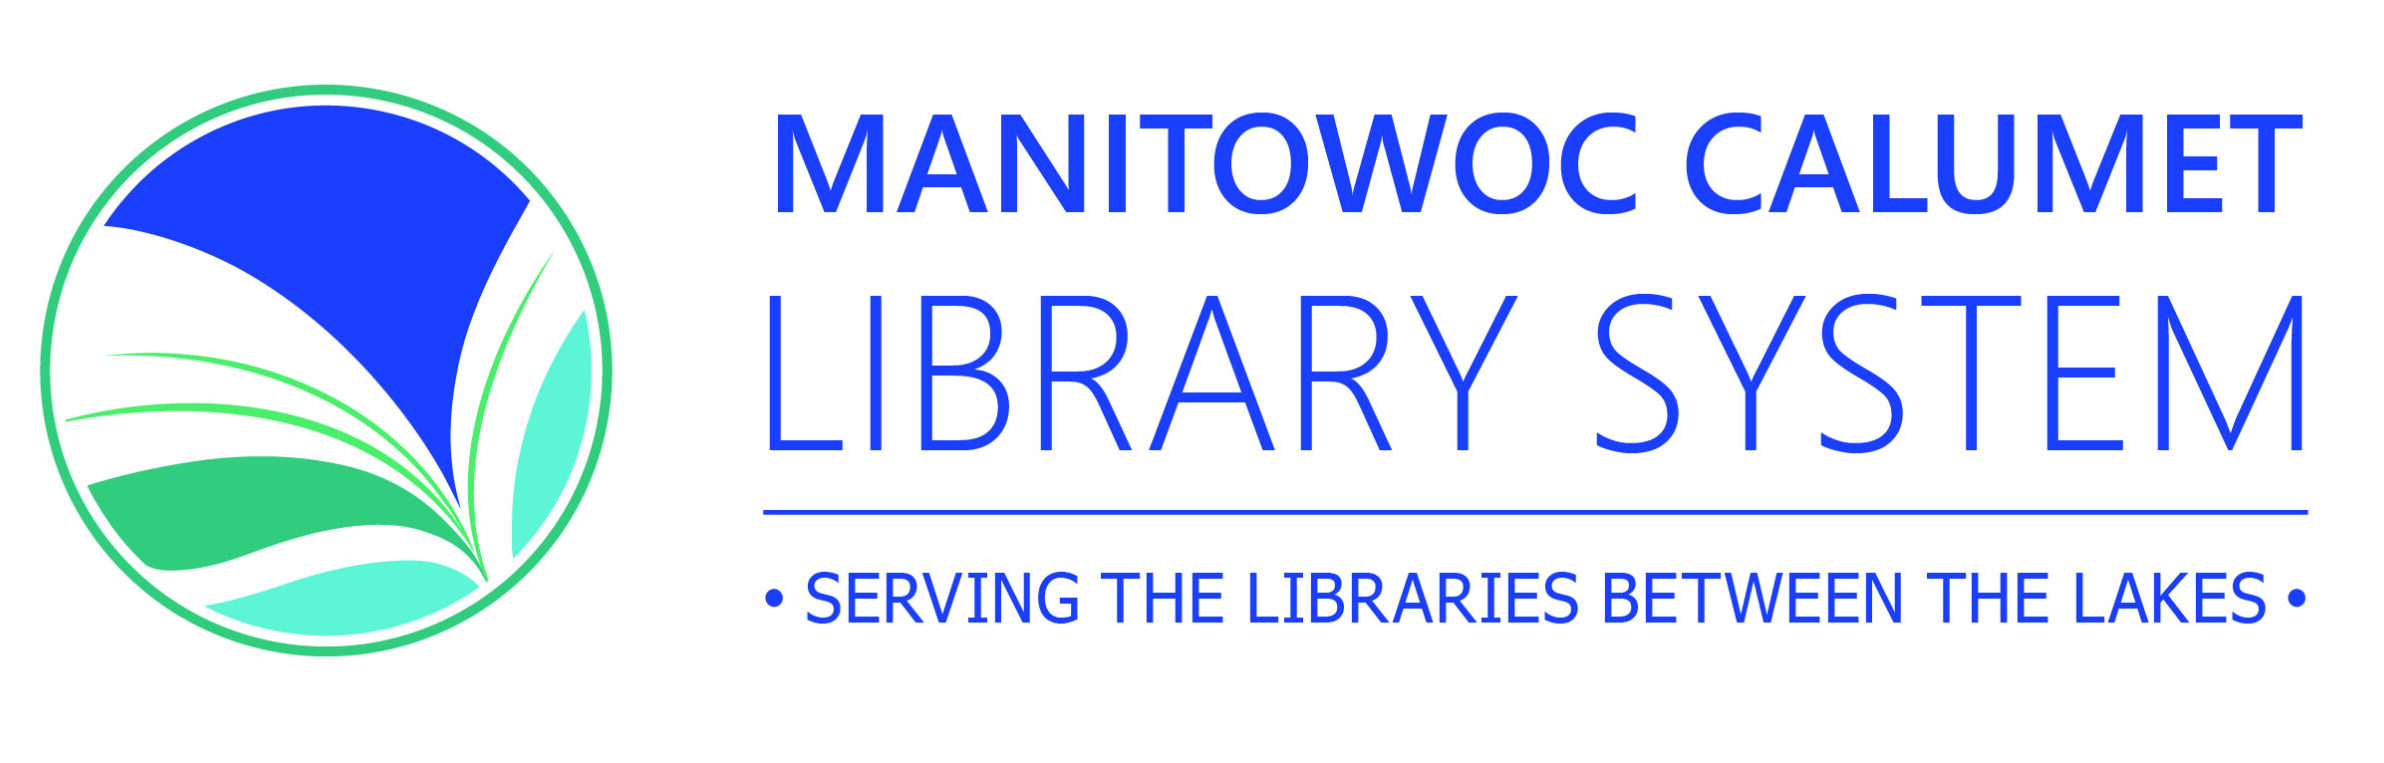 Manitowoc-Calumet Library System